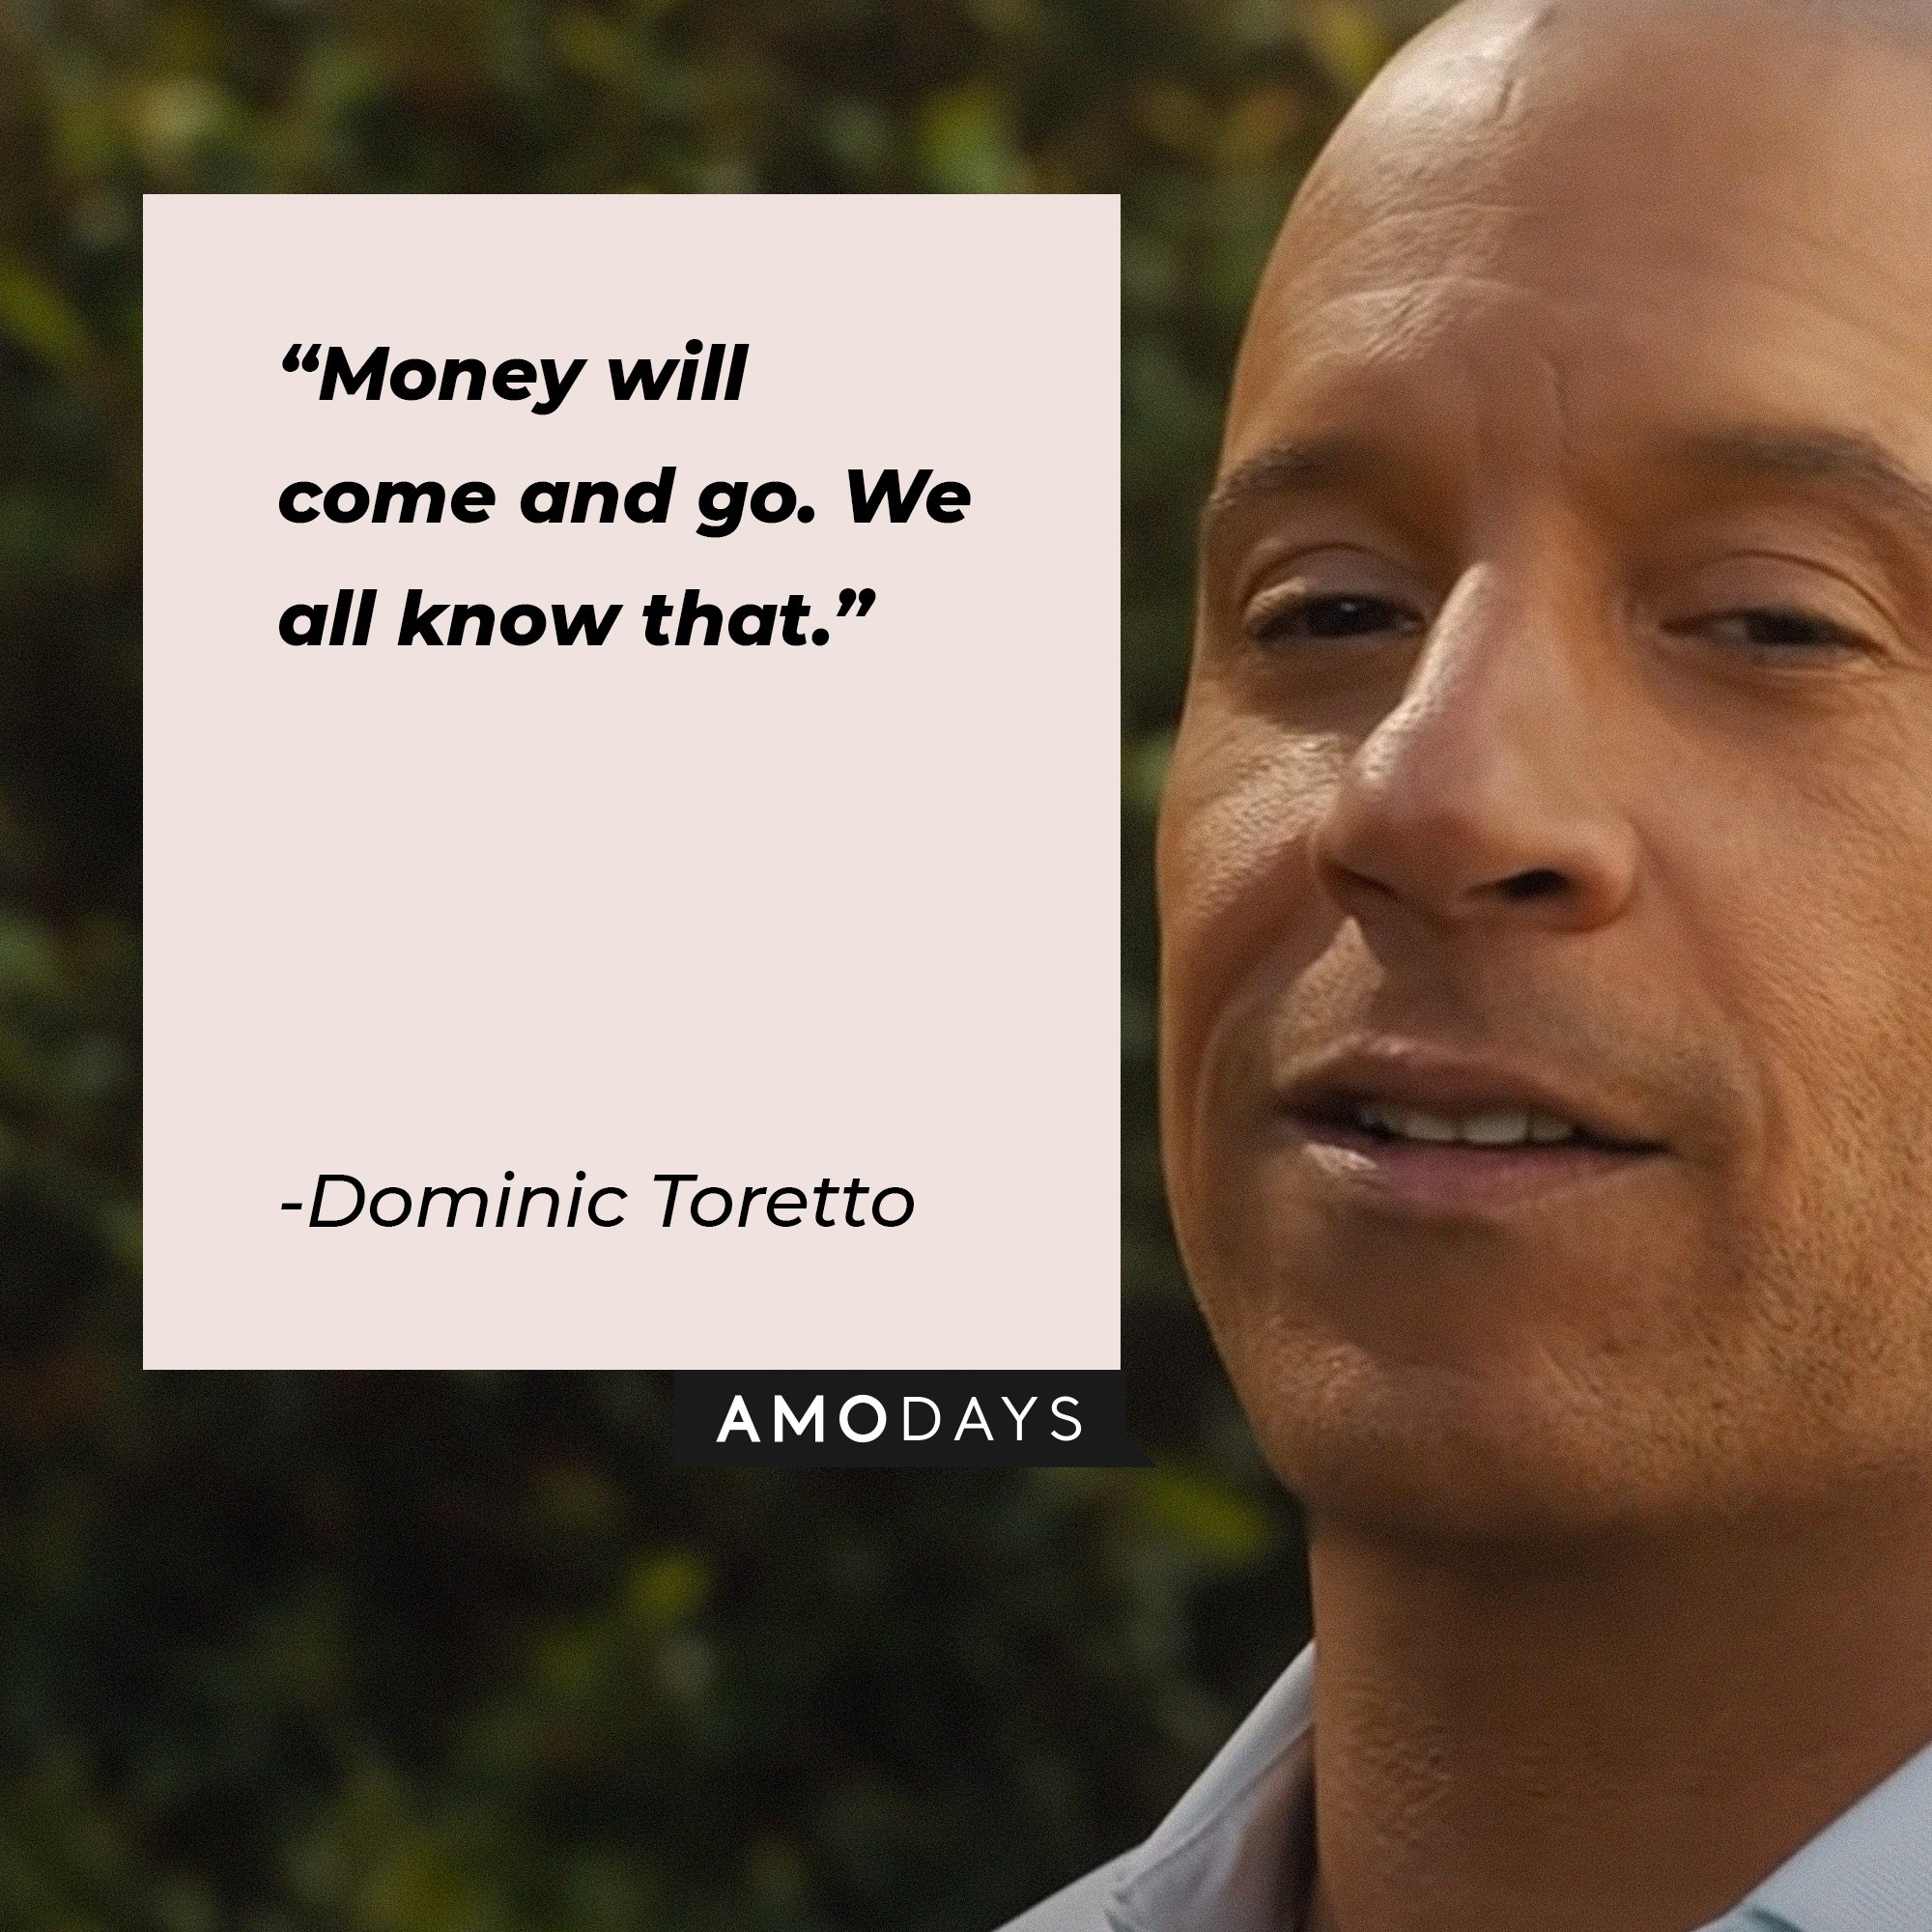  Dominic Toretto’s quote: “Money will come and go. We all know that.” │Image: AmoDays